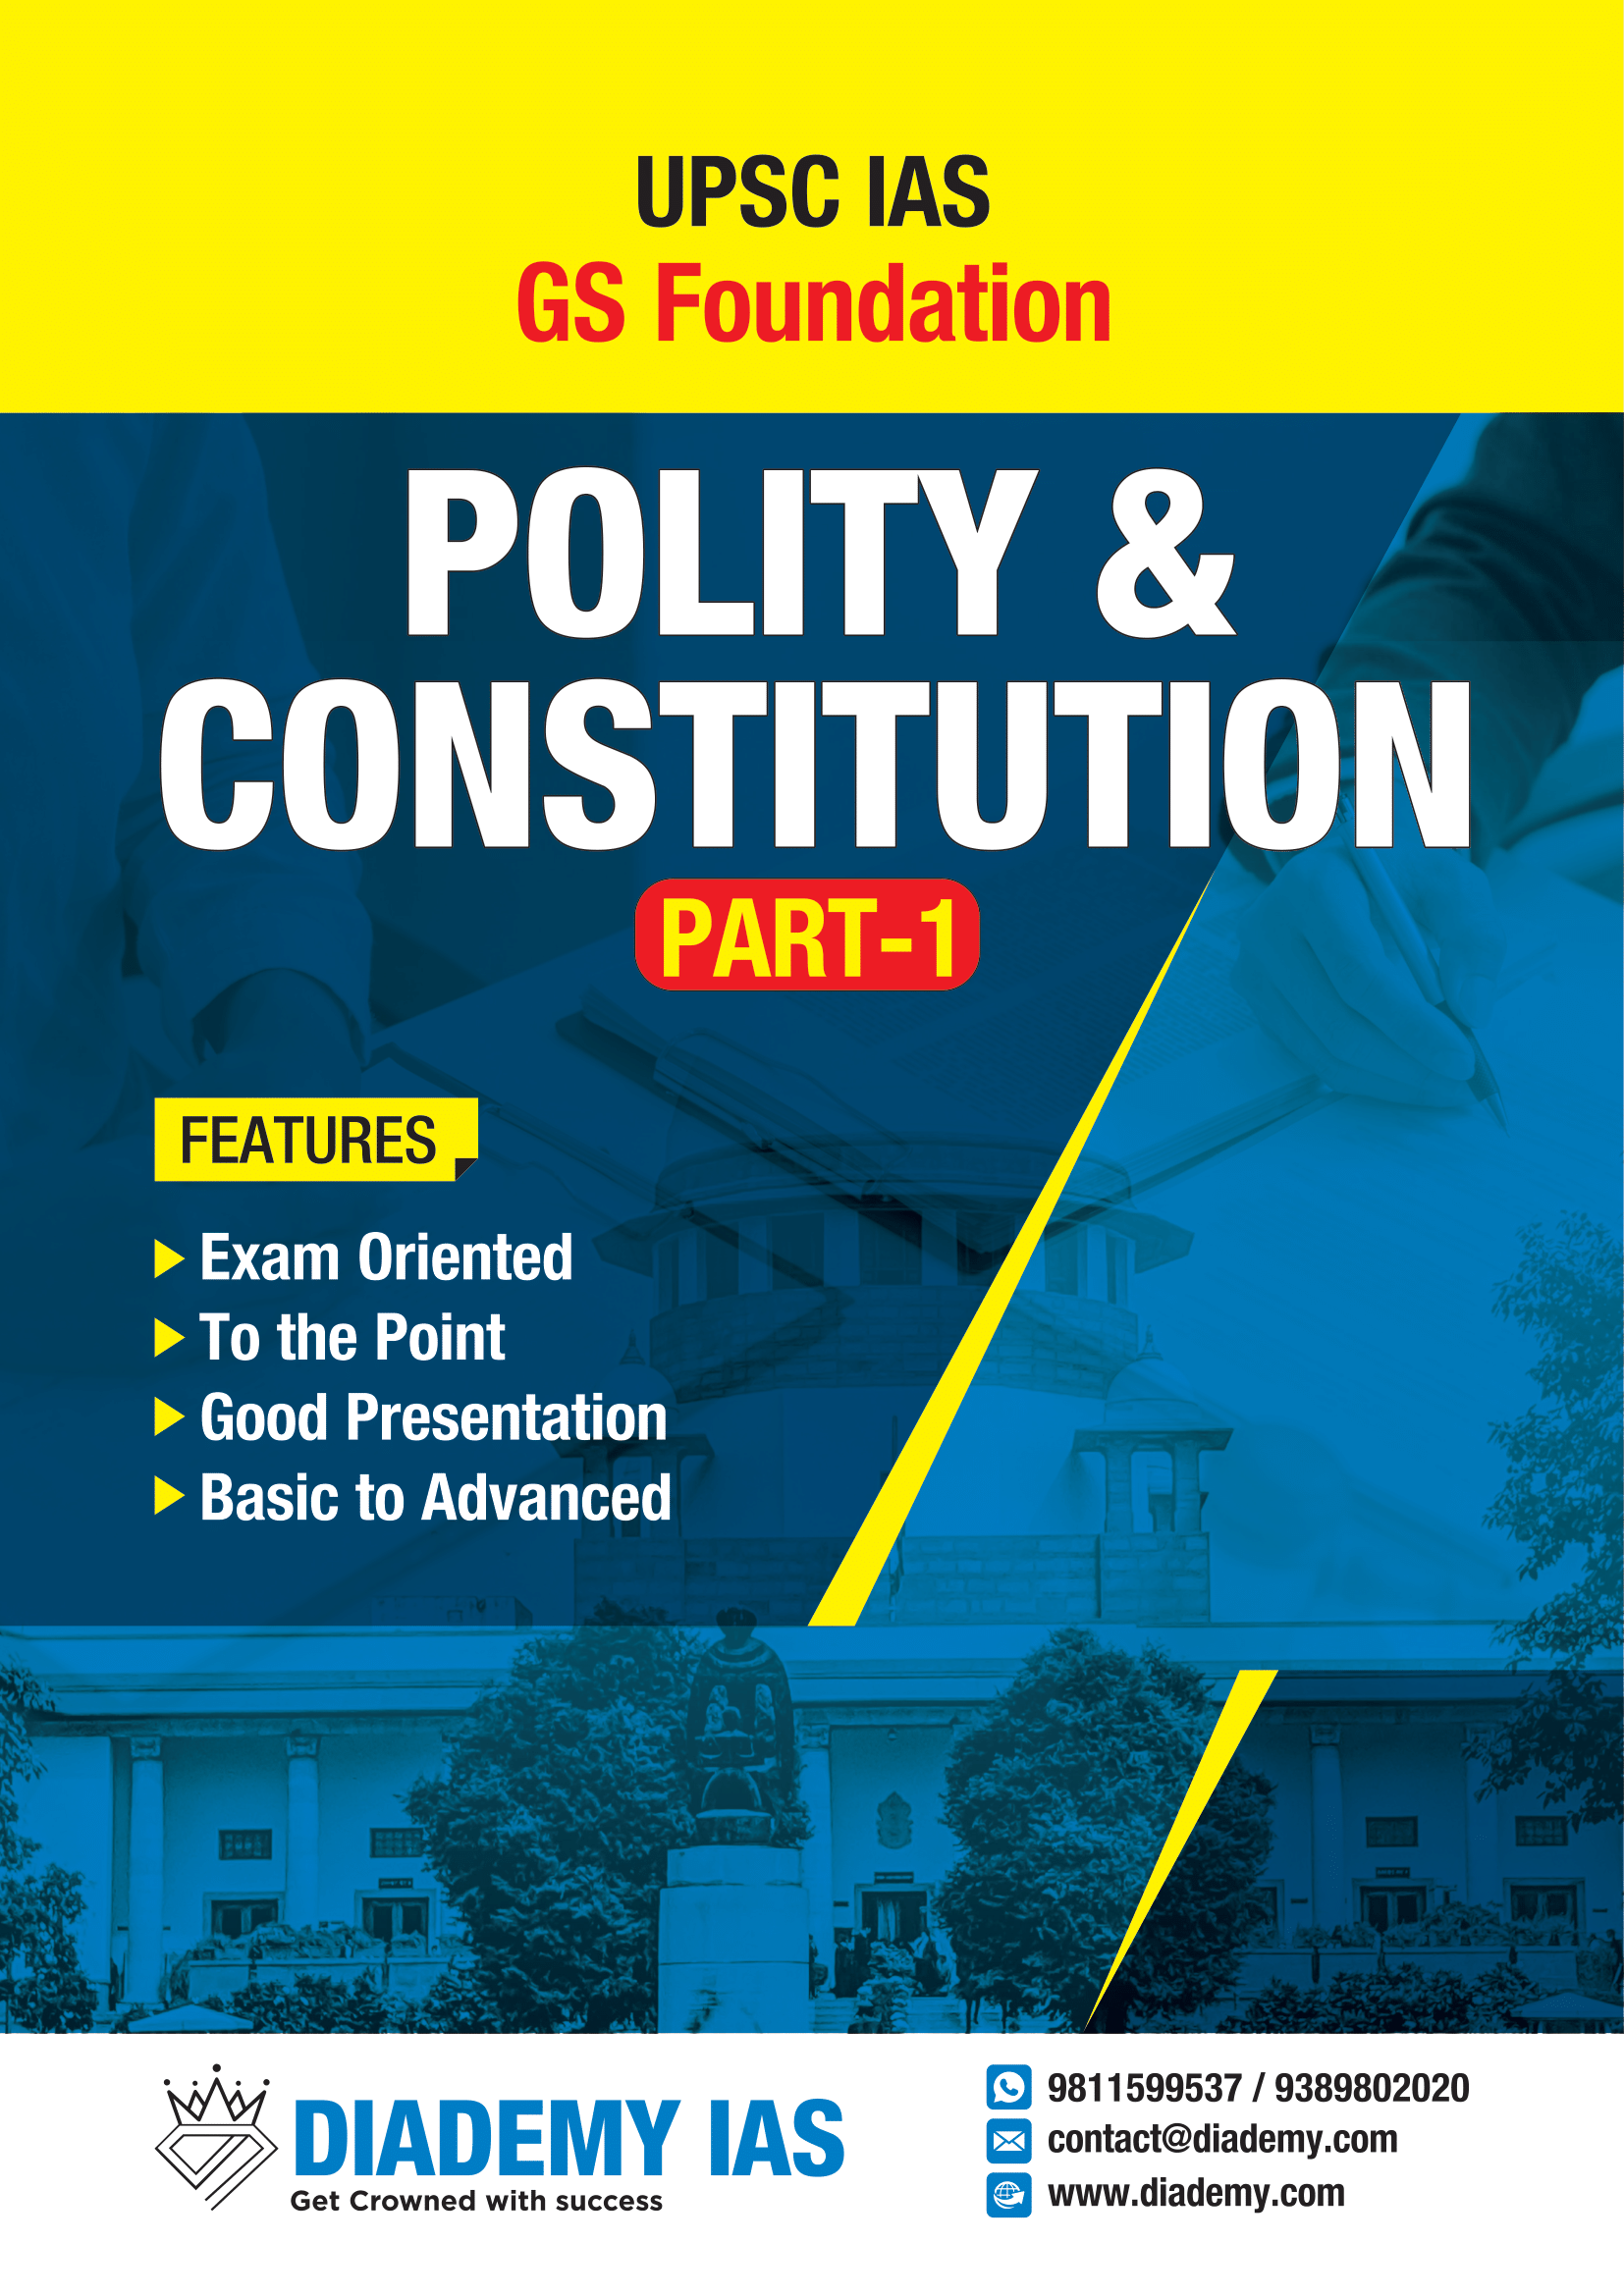 Polity-Contitution-Part-1-2-1.png